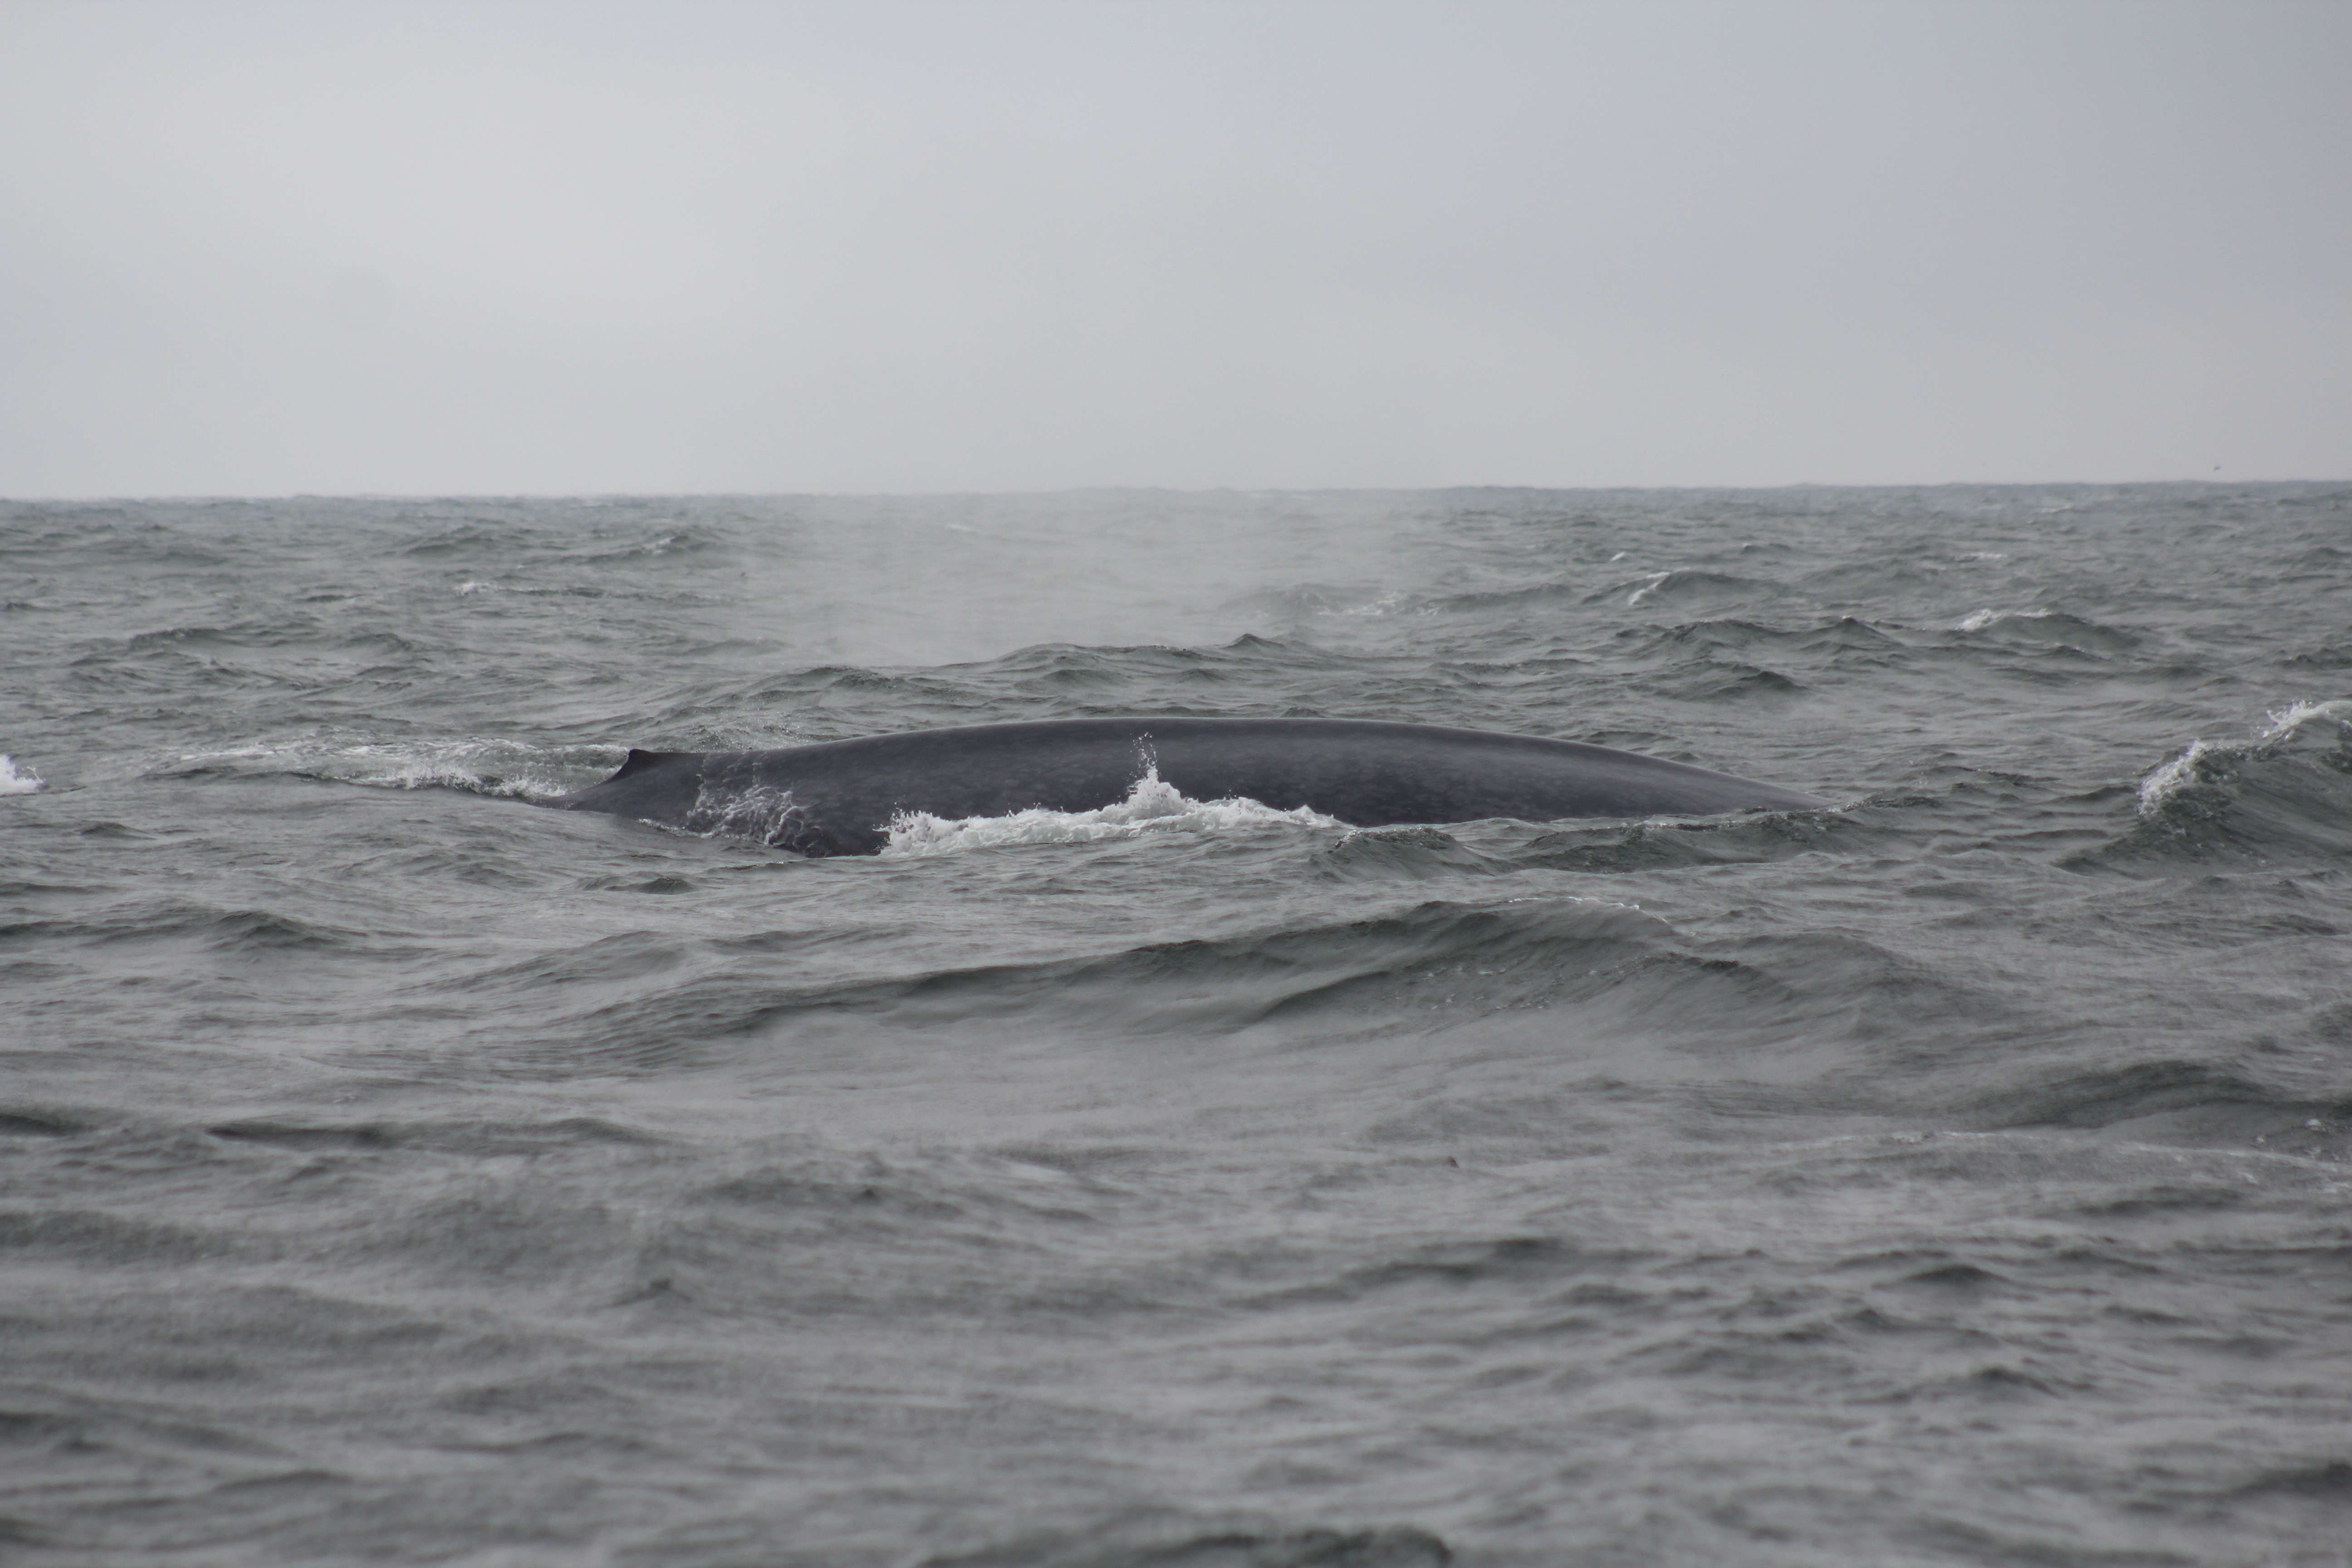 Blue Whales in the Gulf of the Farallones – 7/7/18